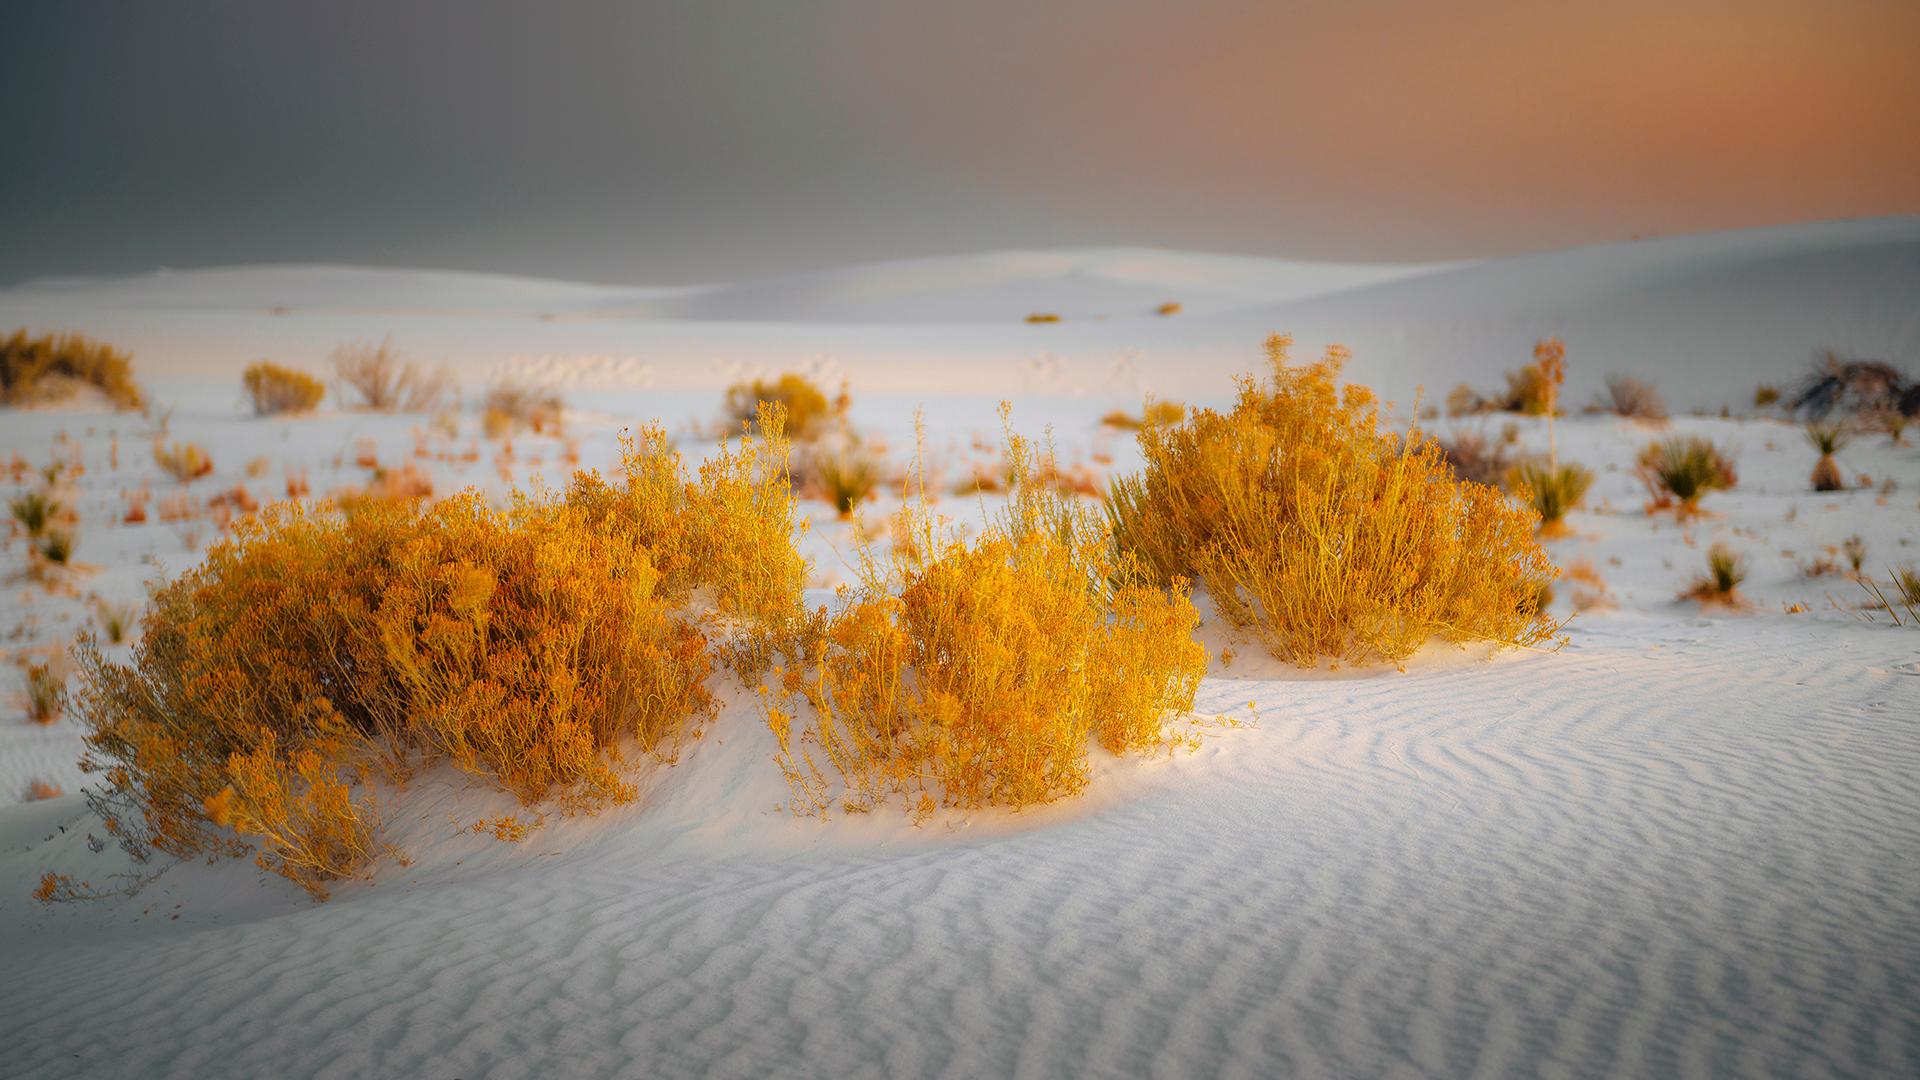 " What appears to be snow mounds are actually white, pristine sand dunes at White Sands National Park, NM. I had only a few minutes of the "glow" remaining, so I ran up a hill with my tripod and was presented with this last "glow". I always believe